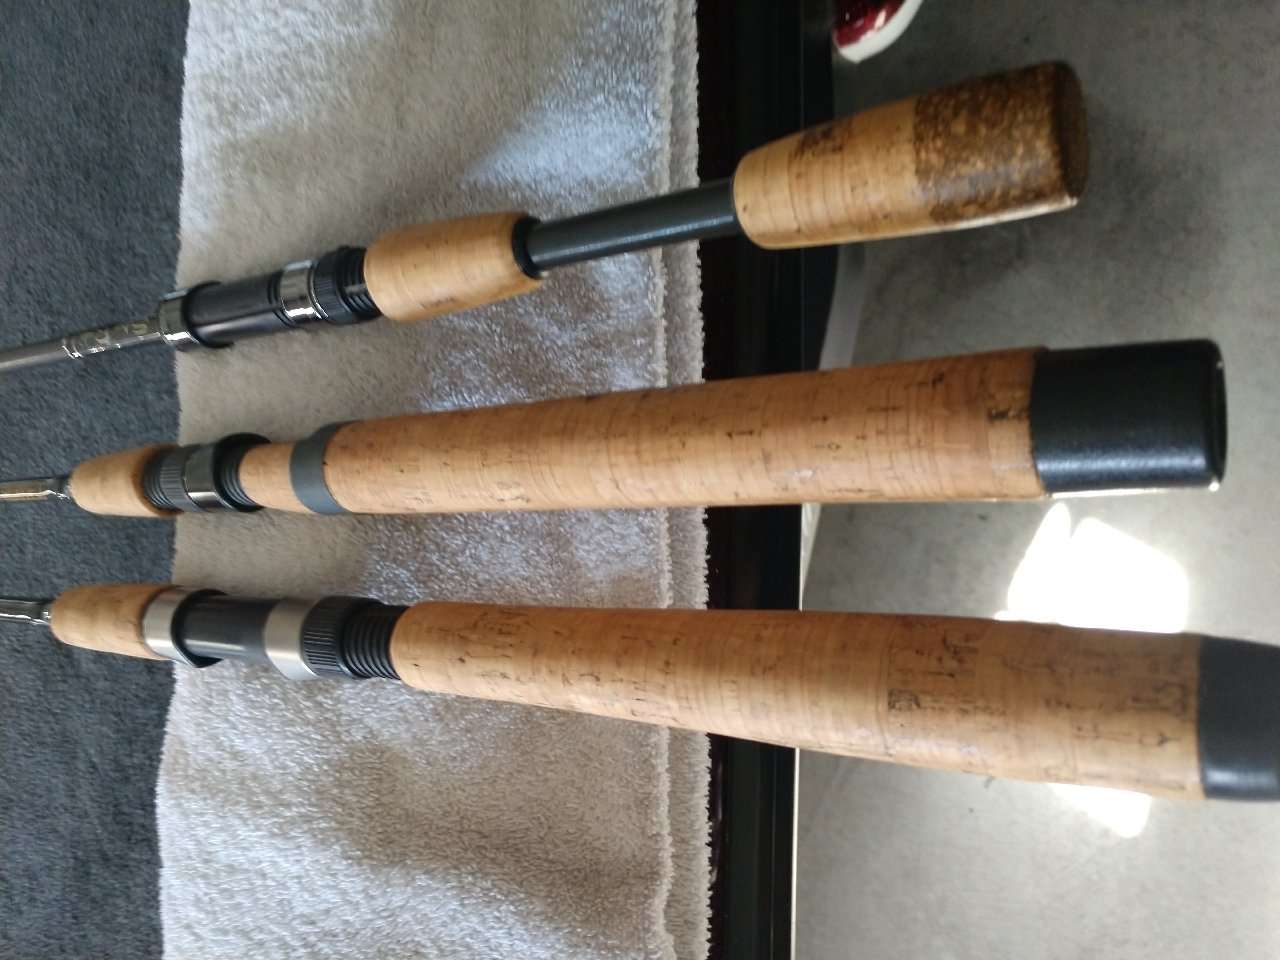 Cleaning up/ reworking cork rod handles - Tacklemaking - Bass Fishing Forums